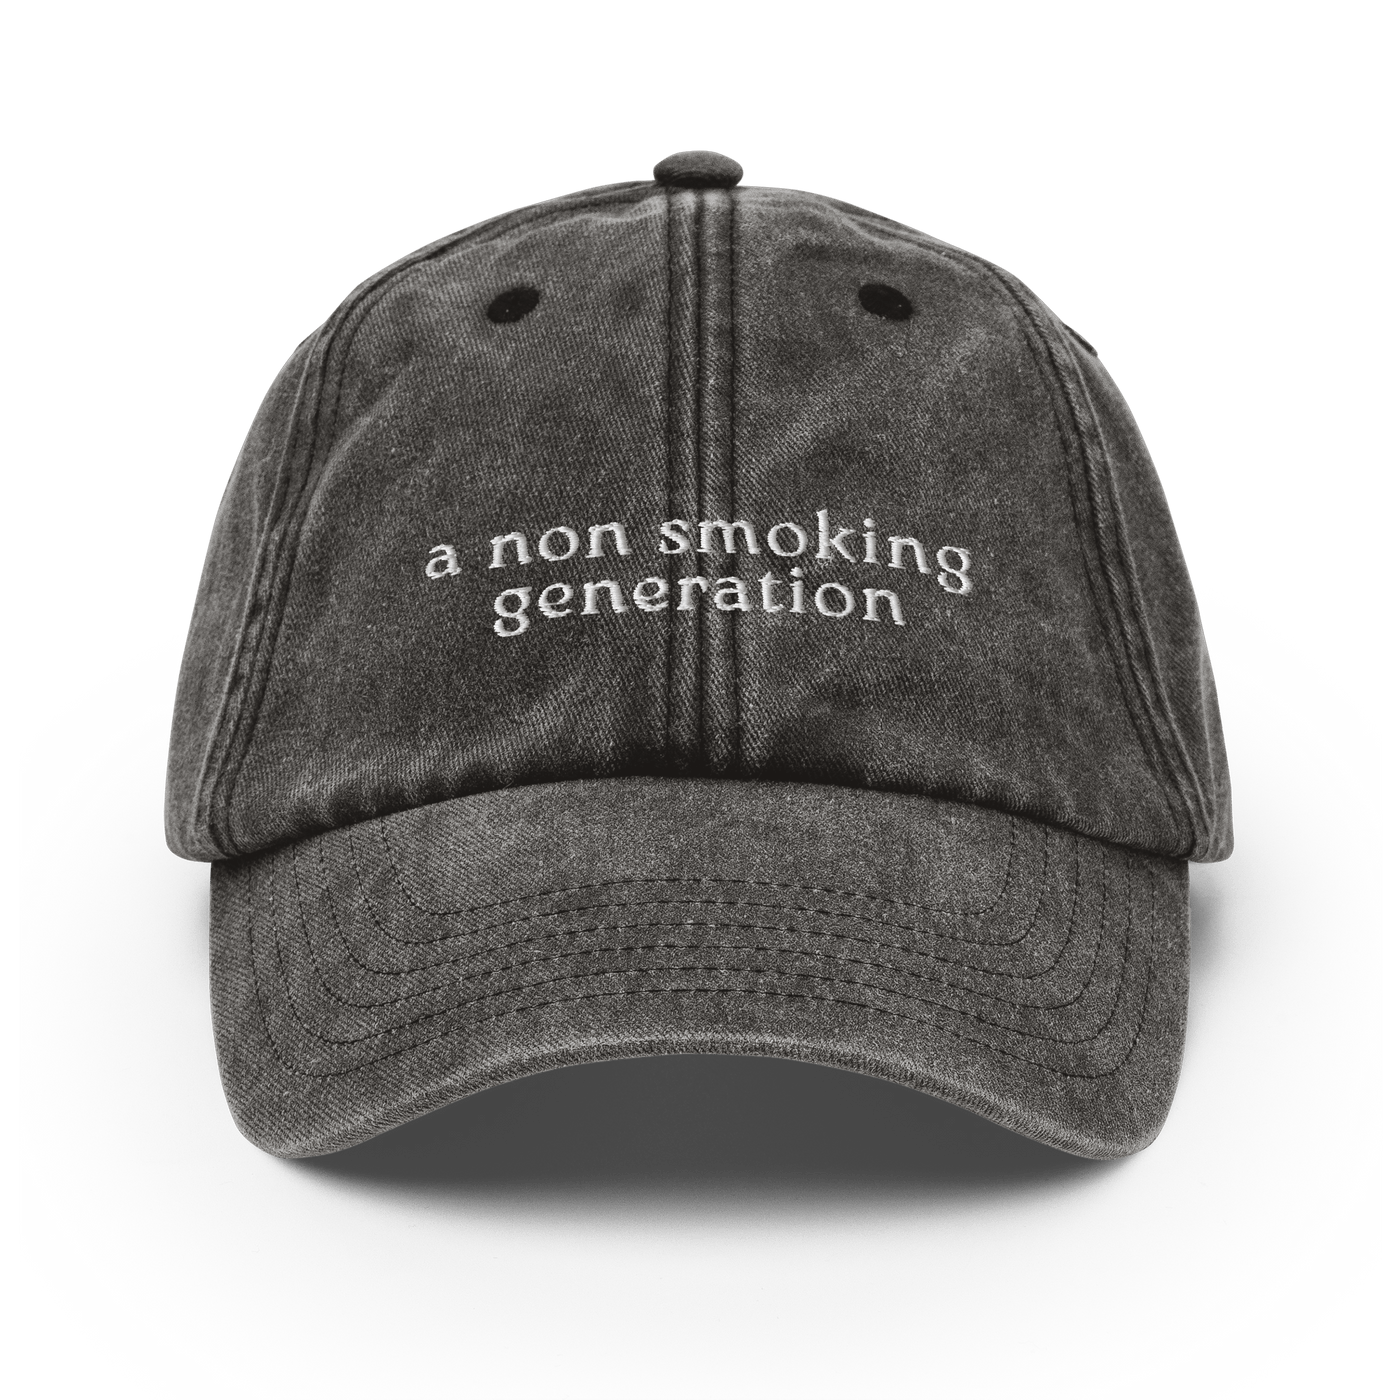 A Non Smoking Generation Vintagekeps - Just Another Cap Store